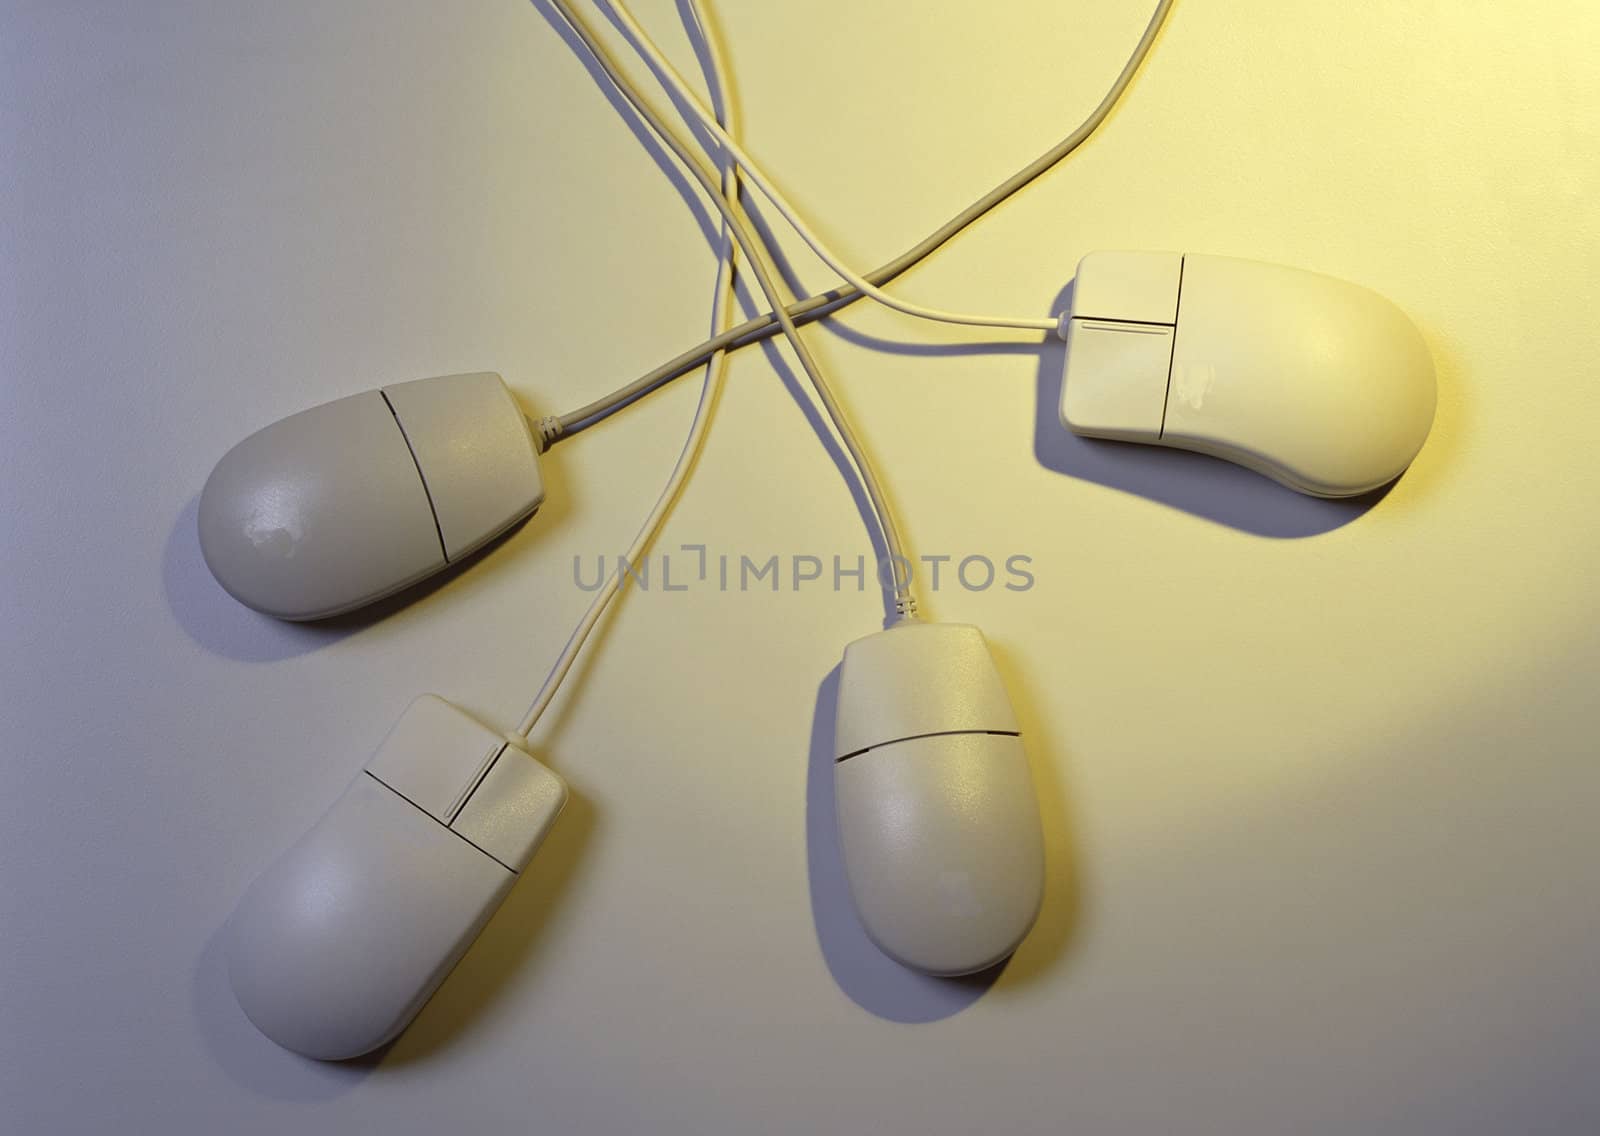 A wired computer mouses